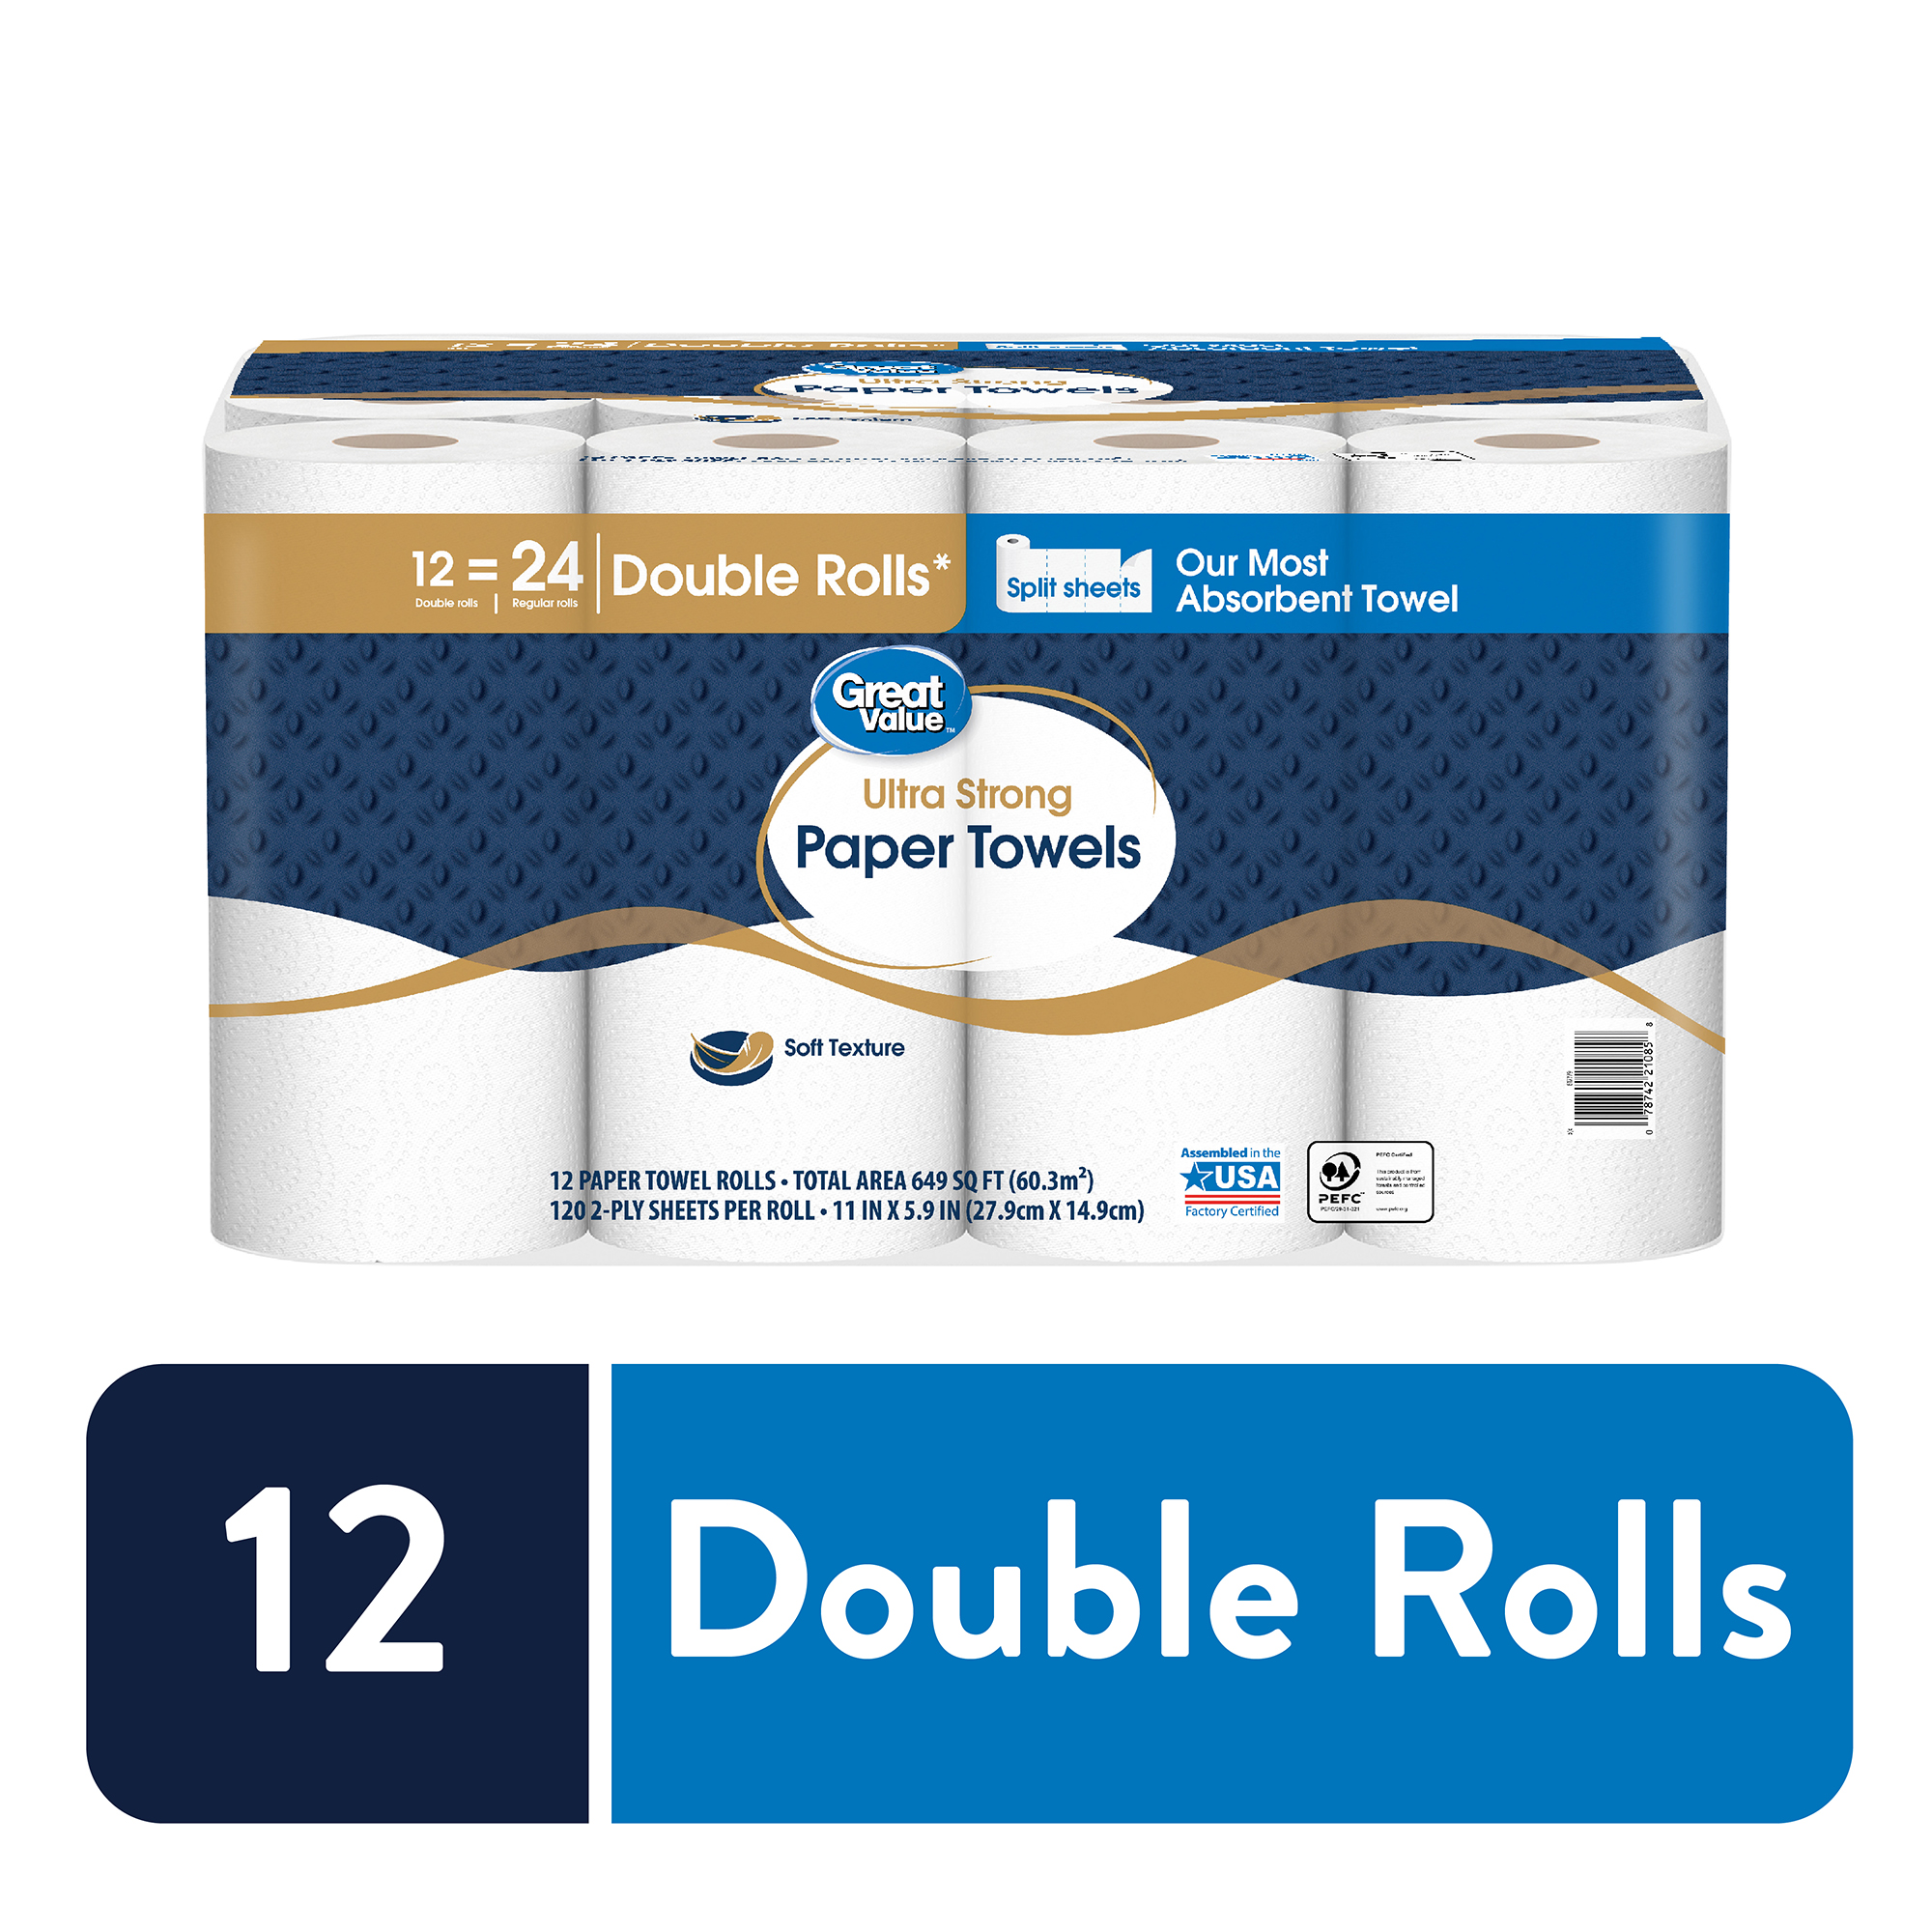 Great Value Ultra Strong Paper Towels, Split Sheets, 12 Double Rolls - image 1 of 10